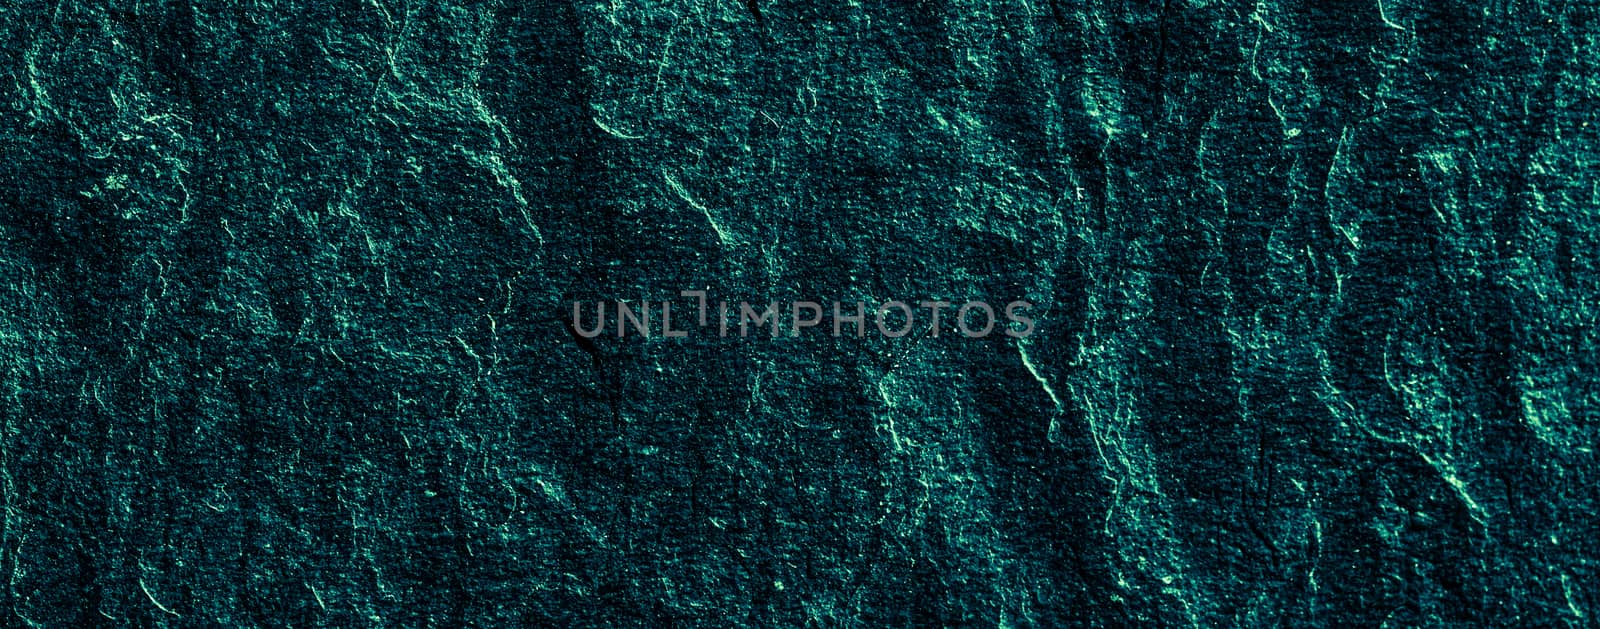 Emerald green stone texture as abstract background, design material and textured surfaces